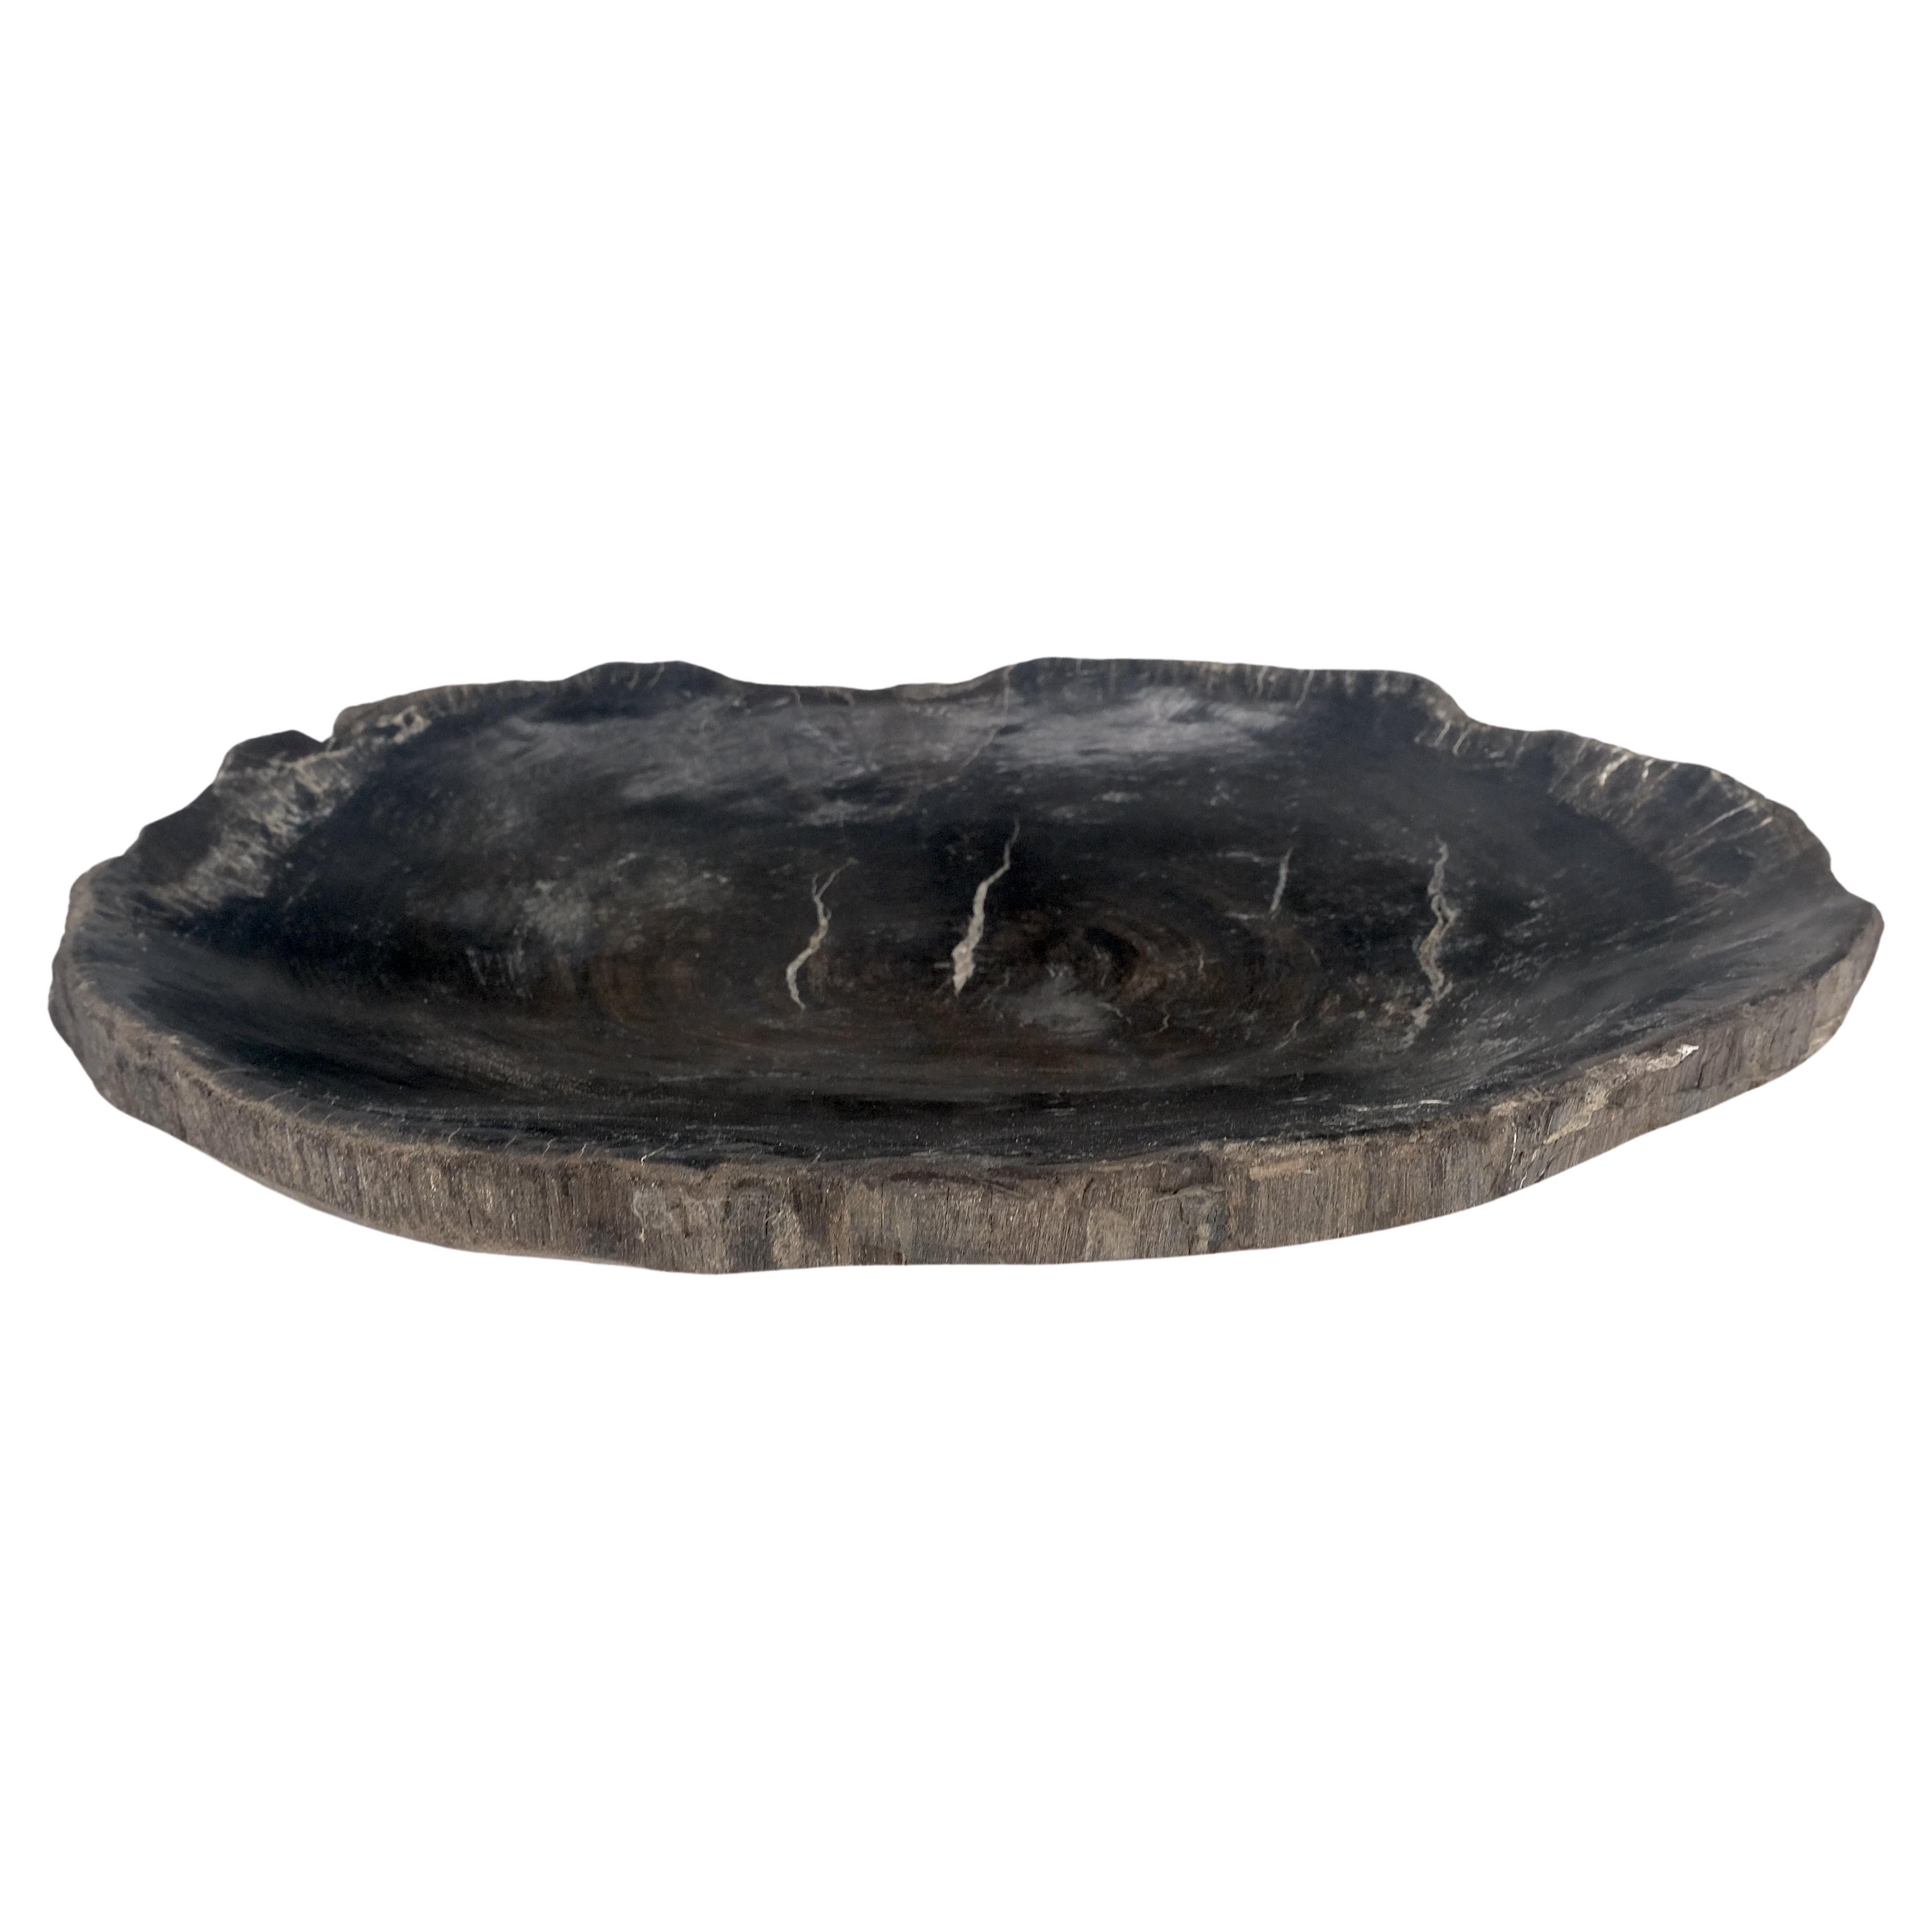 Petrified Wood Oyster Shape Solid Black Oval Bowl Dish Large Plate Ashtray For Sale